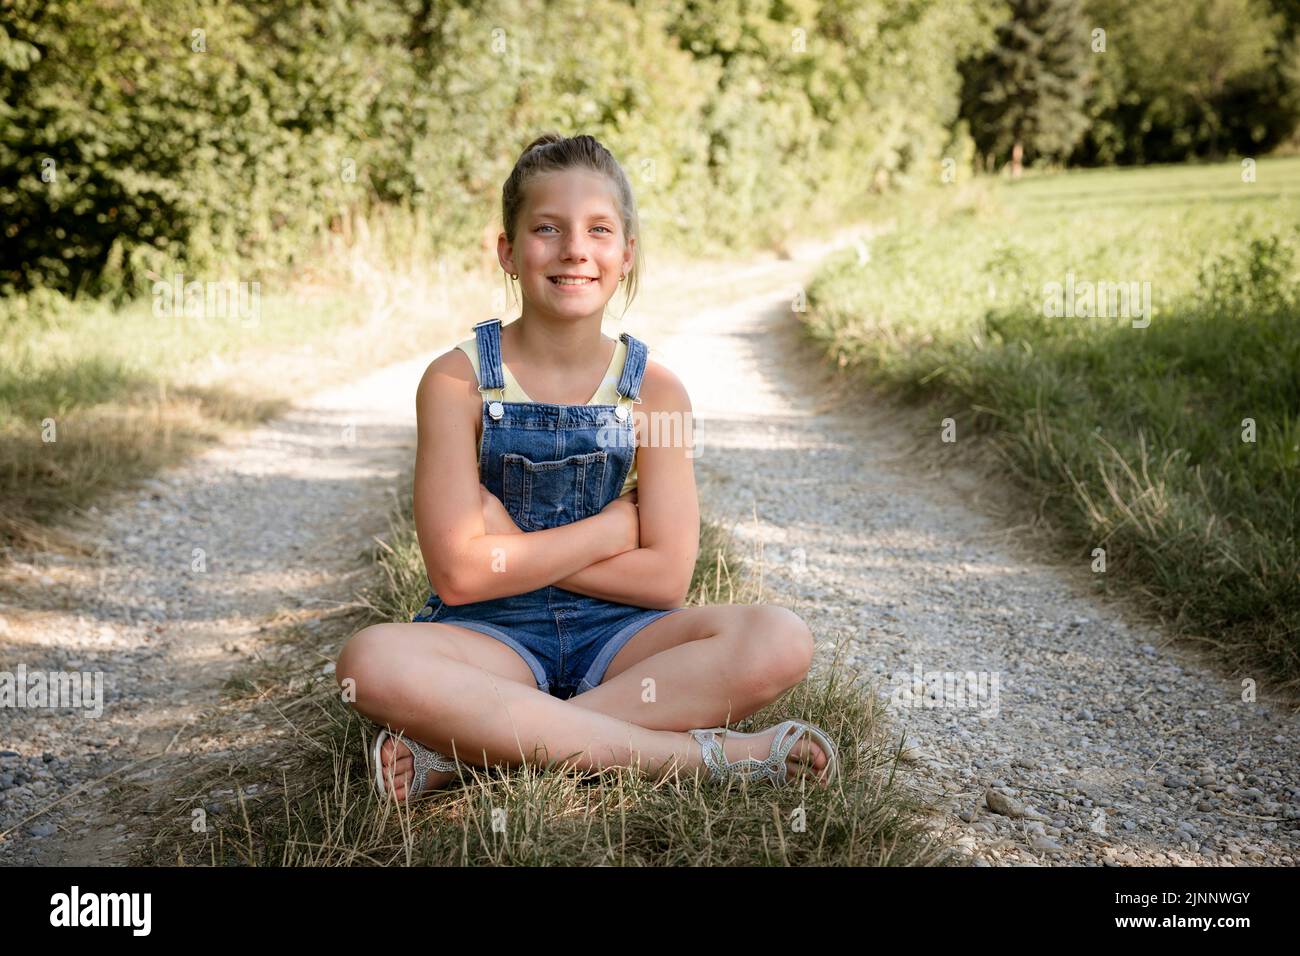 pretty blonde young girl posing with blue dungarees outside in nature ...